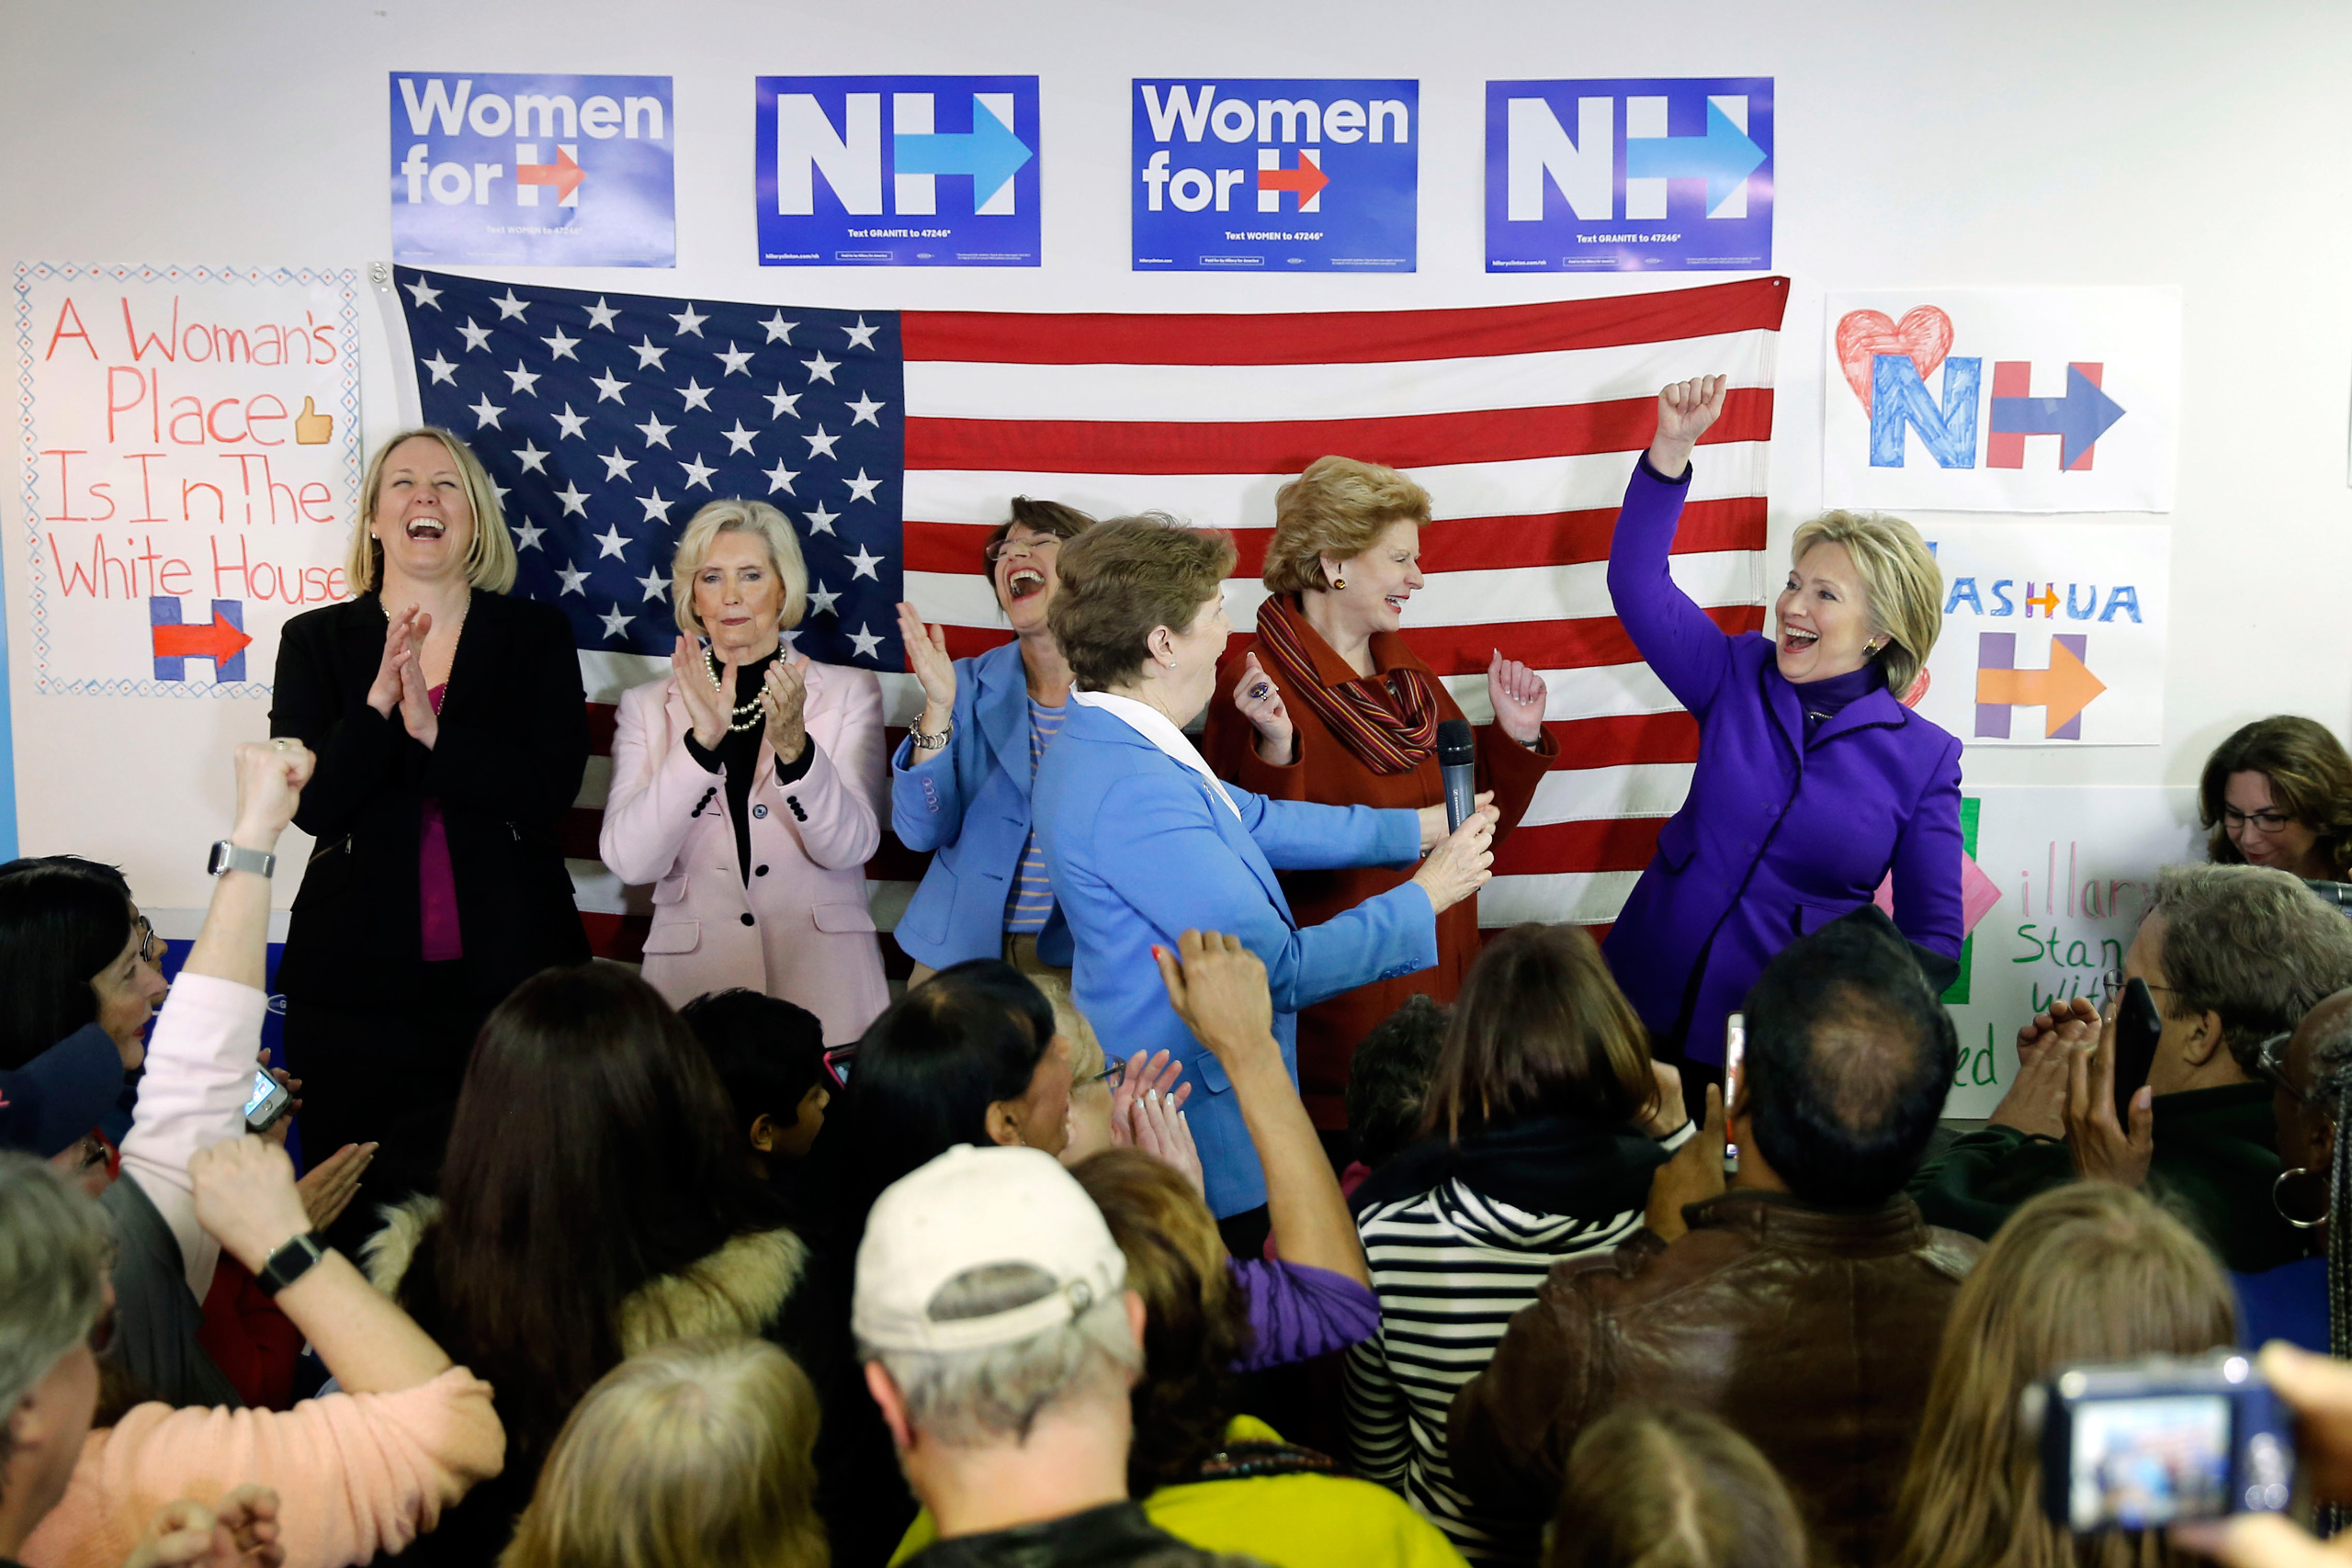 Hillary Clinton is joined on stage by EMILY's List President Stephanie Schriock, left, Lily Ledbetter, Sen. Amy Klobuchar, D-Minn., Jeanne Shaheen, D-N.H., and Sen. Debbie Stabenow, D-Mich., during a visit to a campaign office in Nashua, N.H., on Feb. 5, 2016. (Matt Rourke—AP)